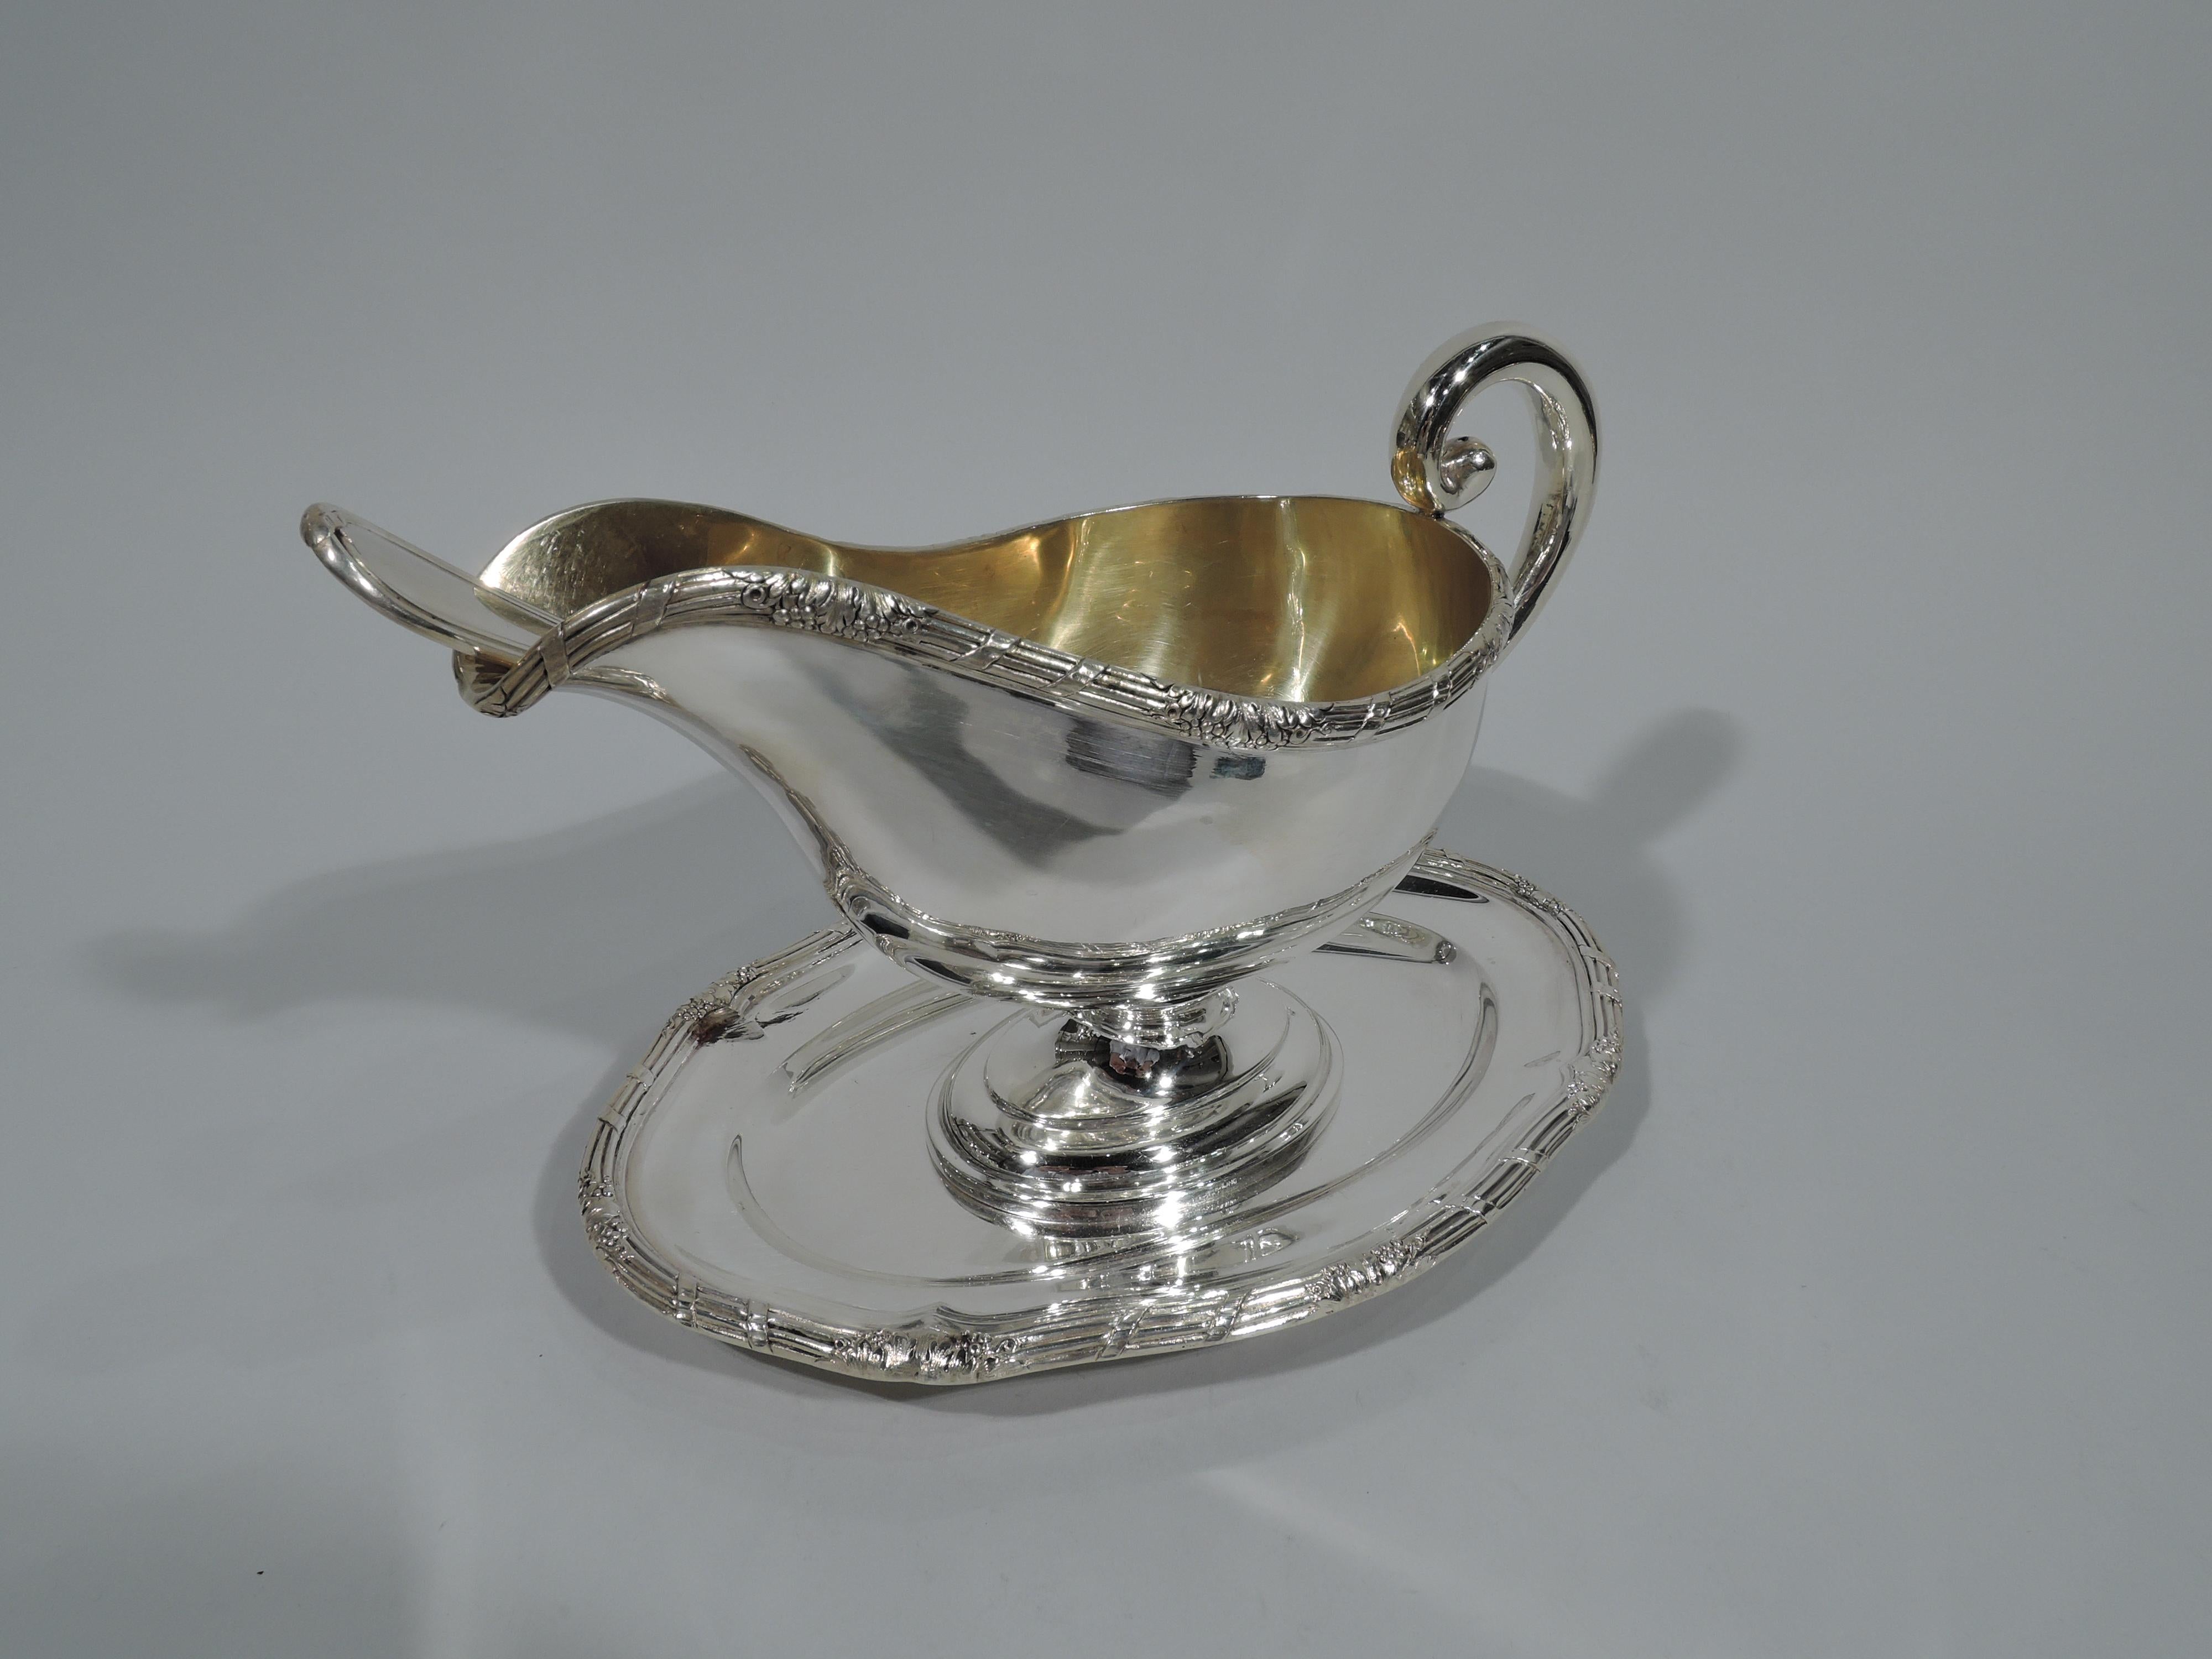 Austrian neoclassical 800 silver gravy boat on stand with ladle, circa 1920. Boat: Helmet mouth with high-looping scroll handle, stepped oval foot, gilt-washed interior, and reeded rim with leaves and berries. Stand: Shaped oval with same rim. Ladle